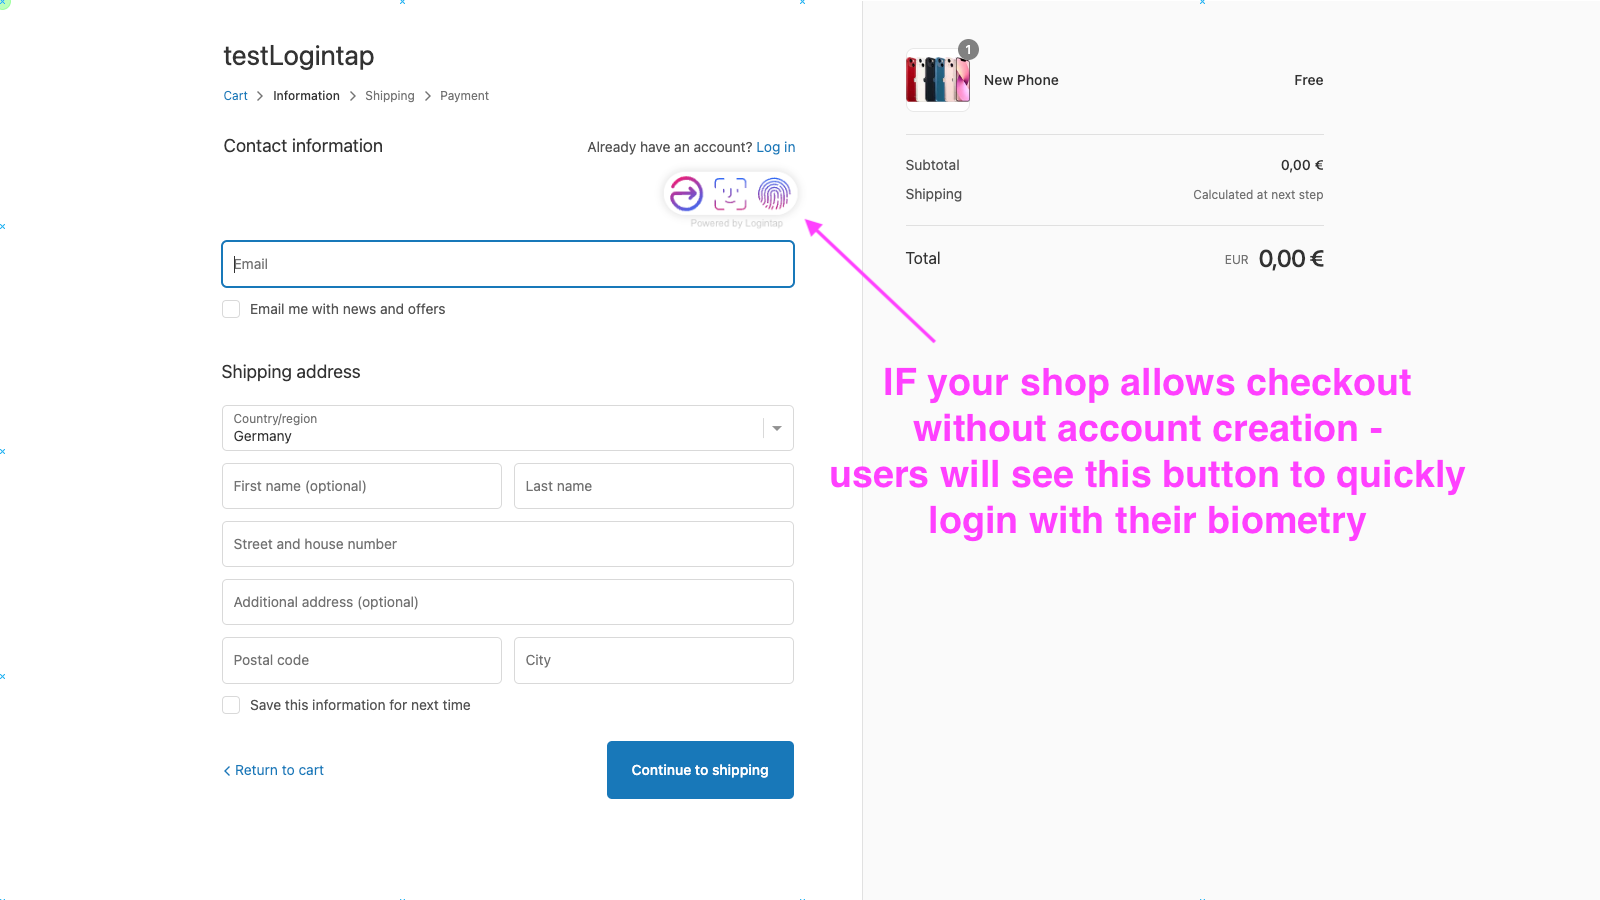 Your checkout page is updated with biometric login button